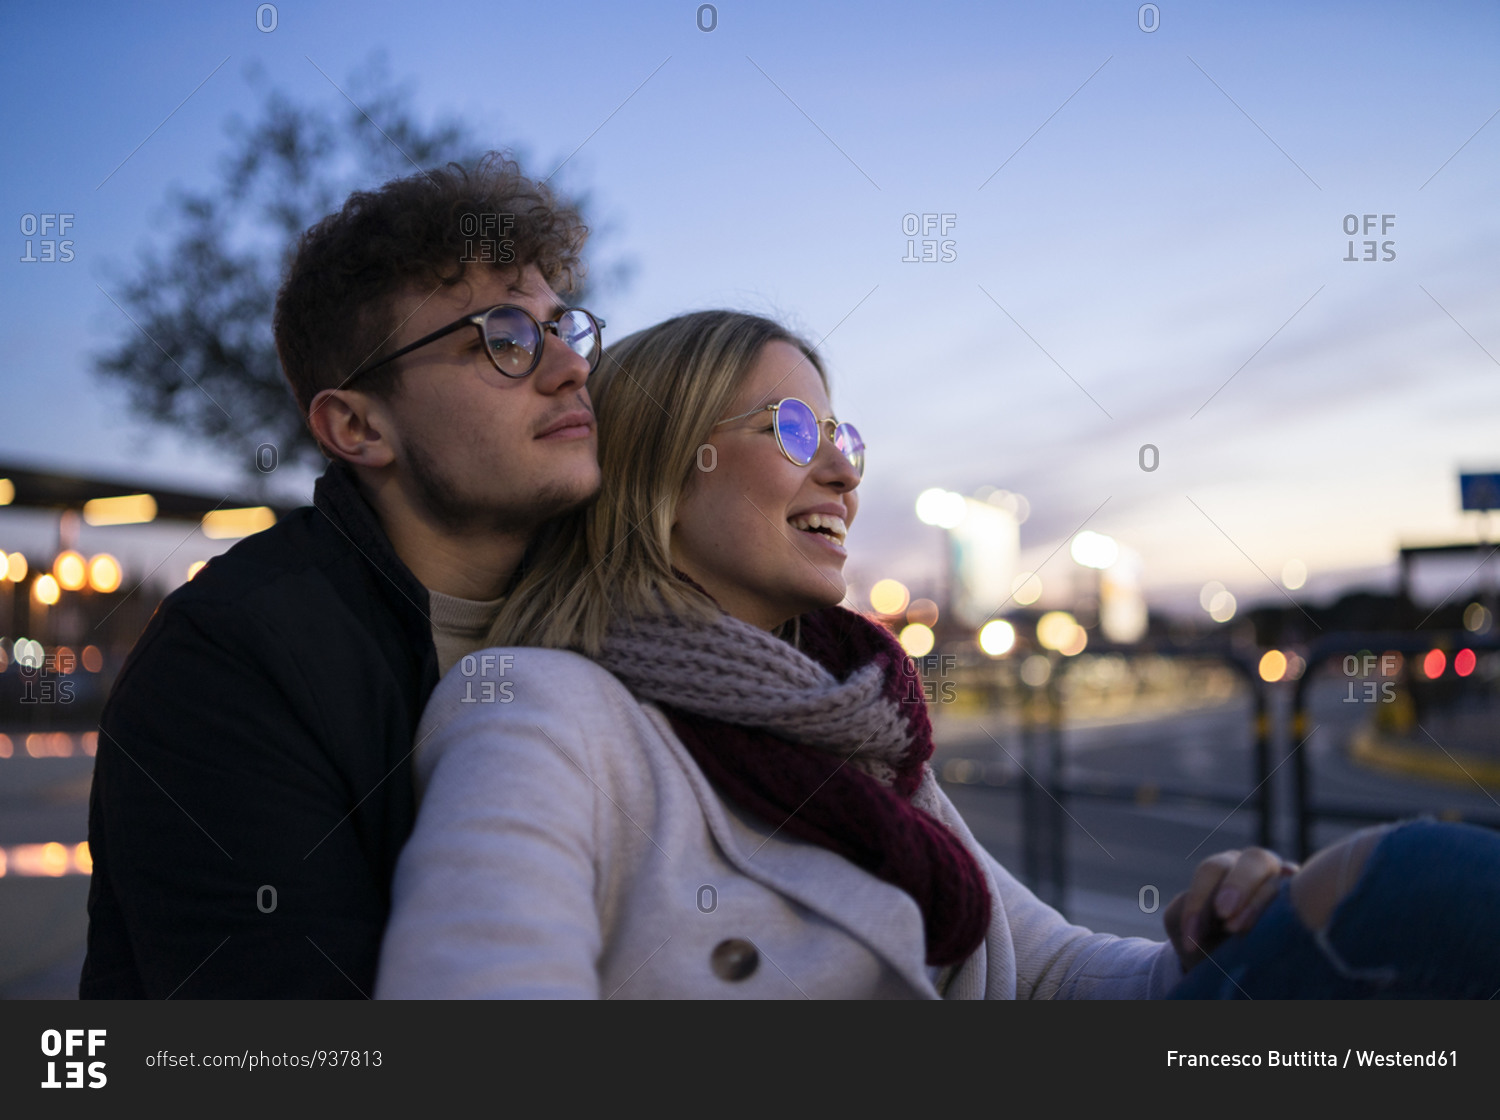 Young couple in love at evening twilight stock photo -
OFFSET